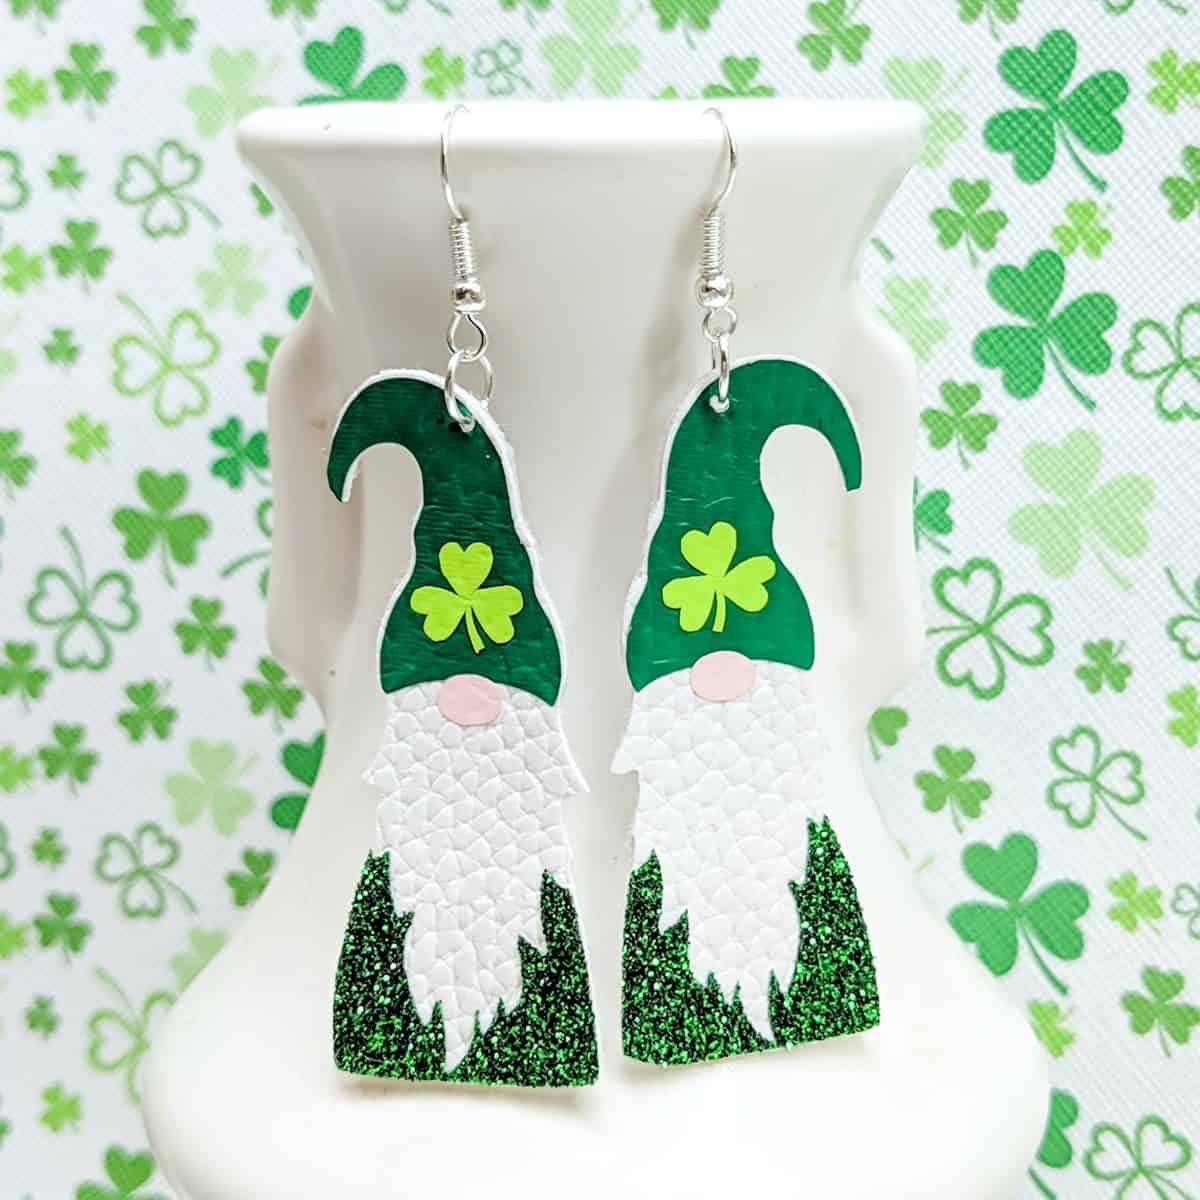 How to Make St. Patrick’s Day Gnome DIY Earrings